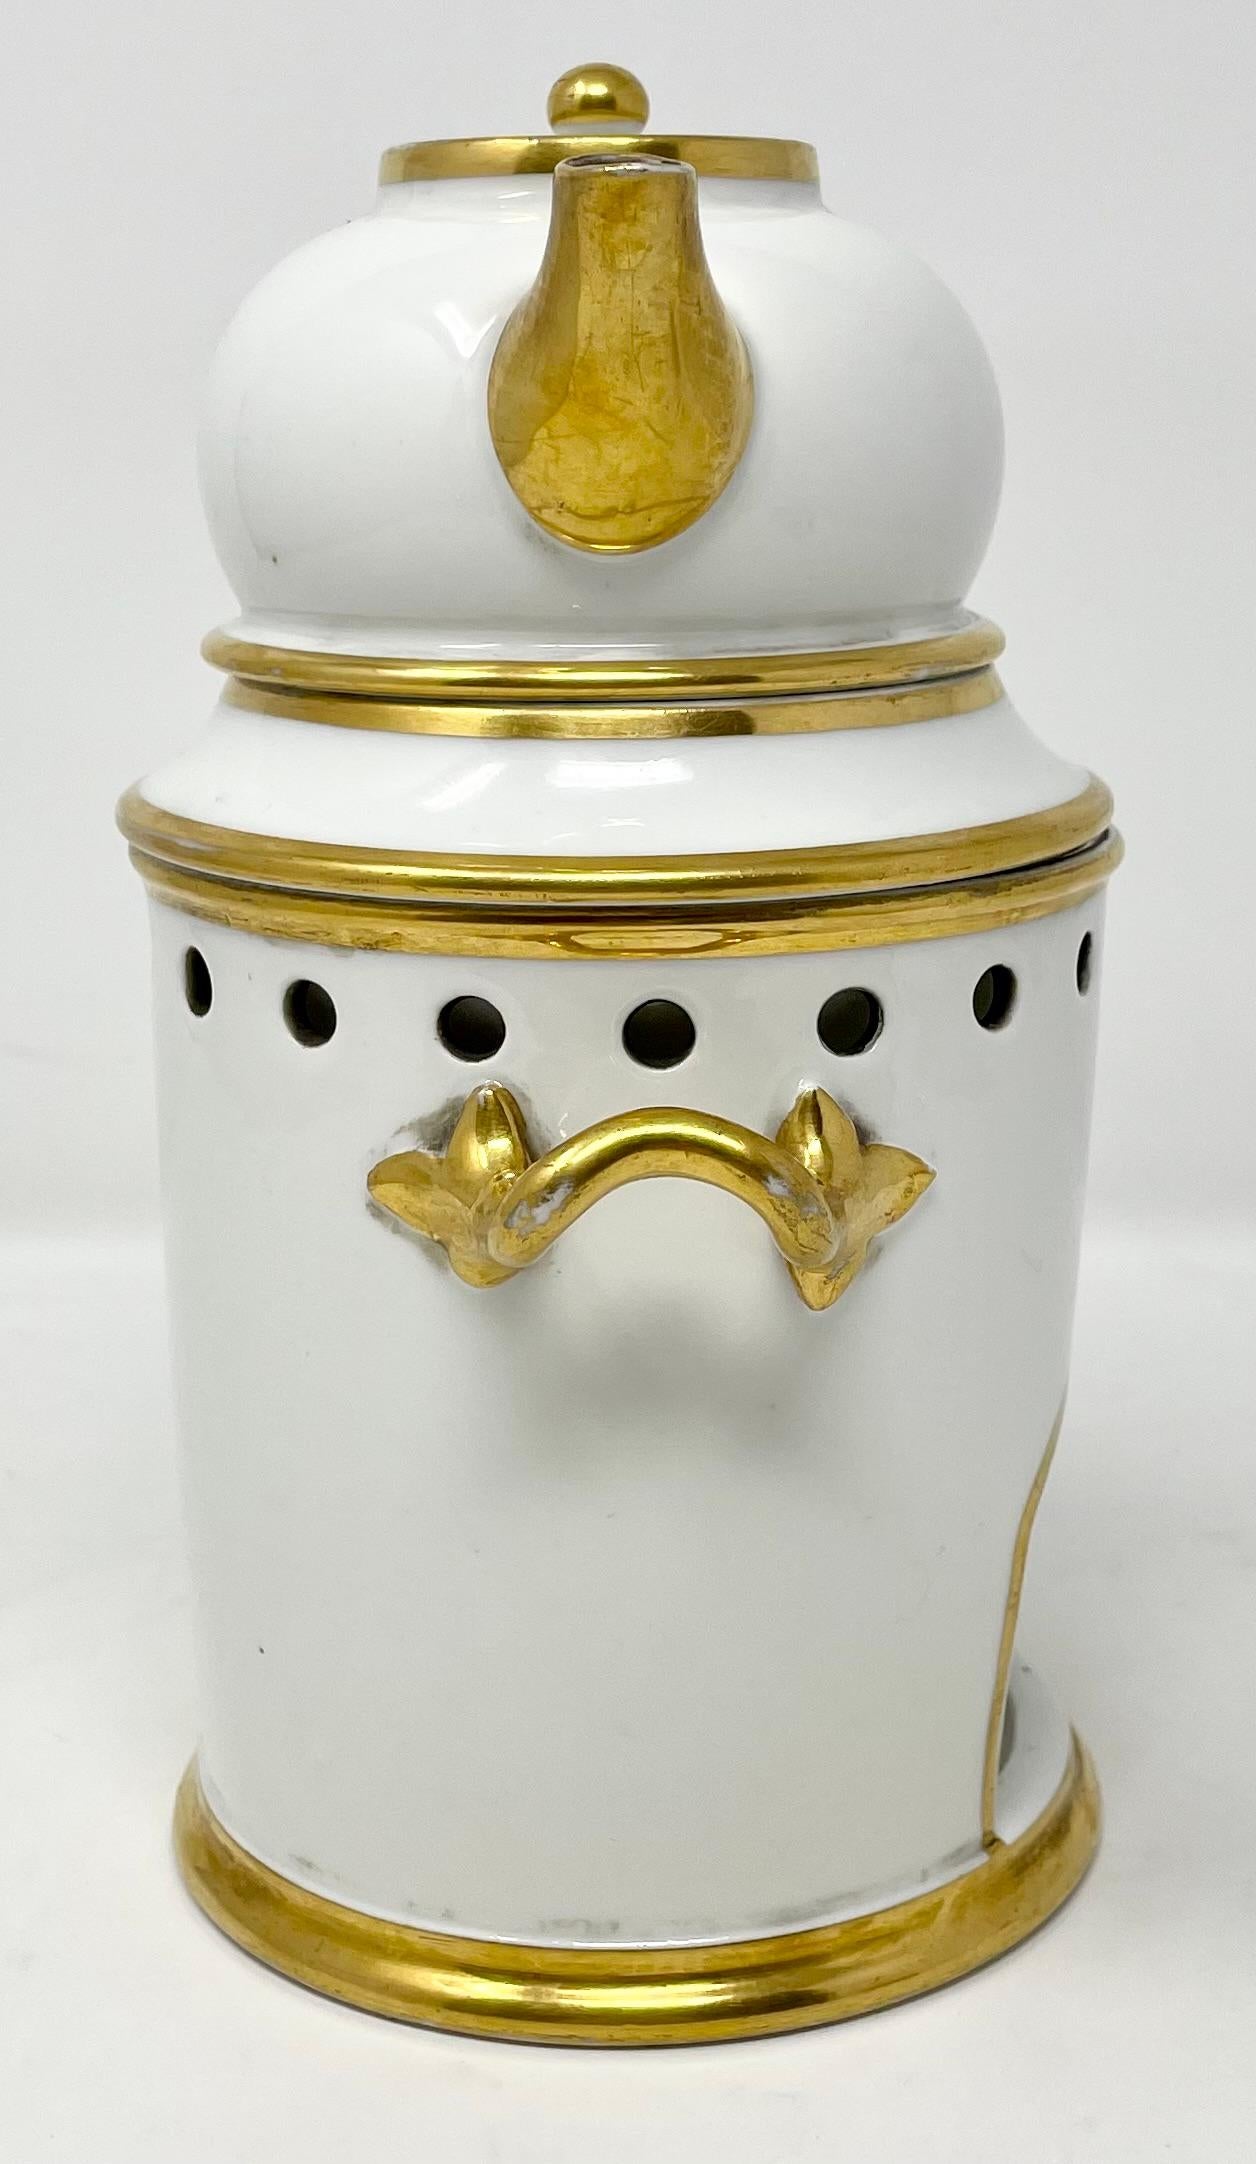 20th Century Antique French Old Paris Porcelain Veilleuse or Tea Warmer Night Light, Ca. 1900 For Sale